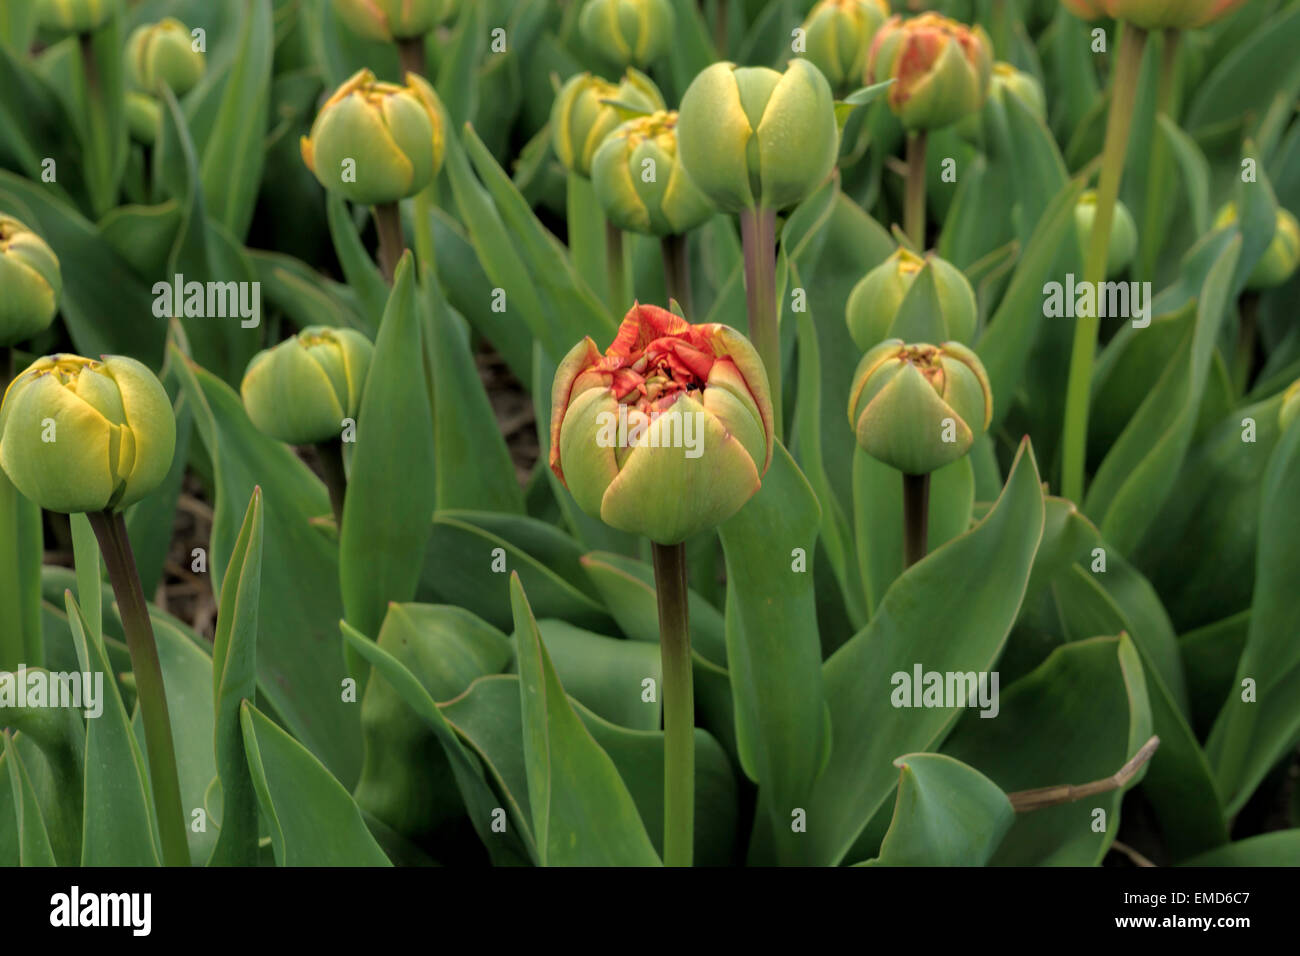 Spring time in The Netherlands: Typically flat countryside and budding tulips, Lisse, South Holland. Stock Photo